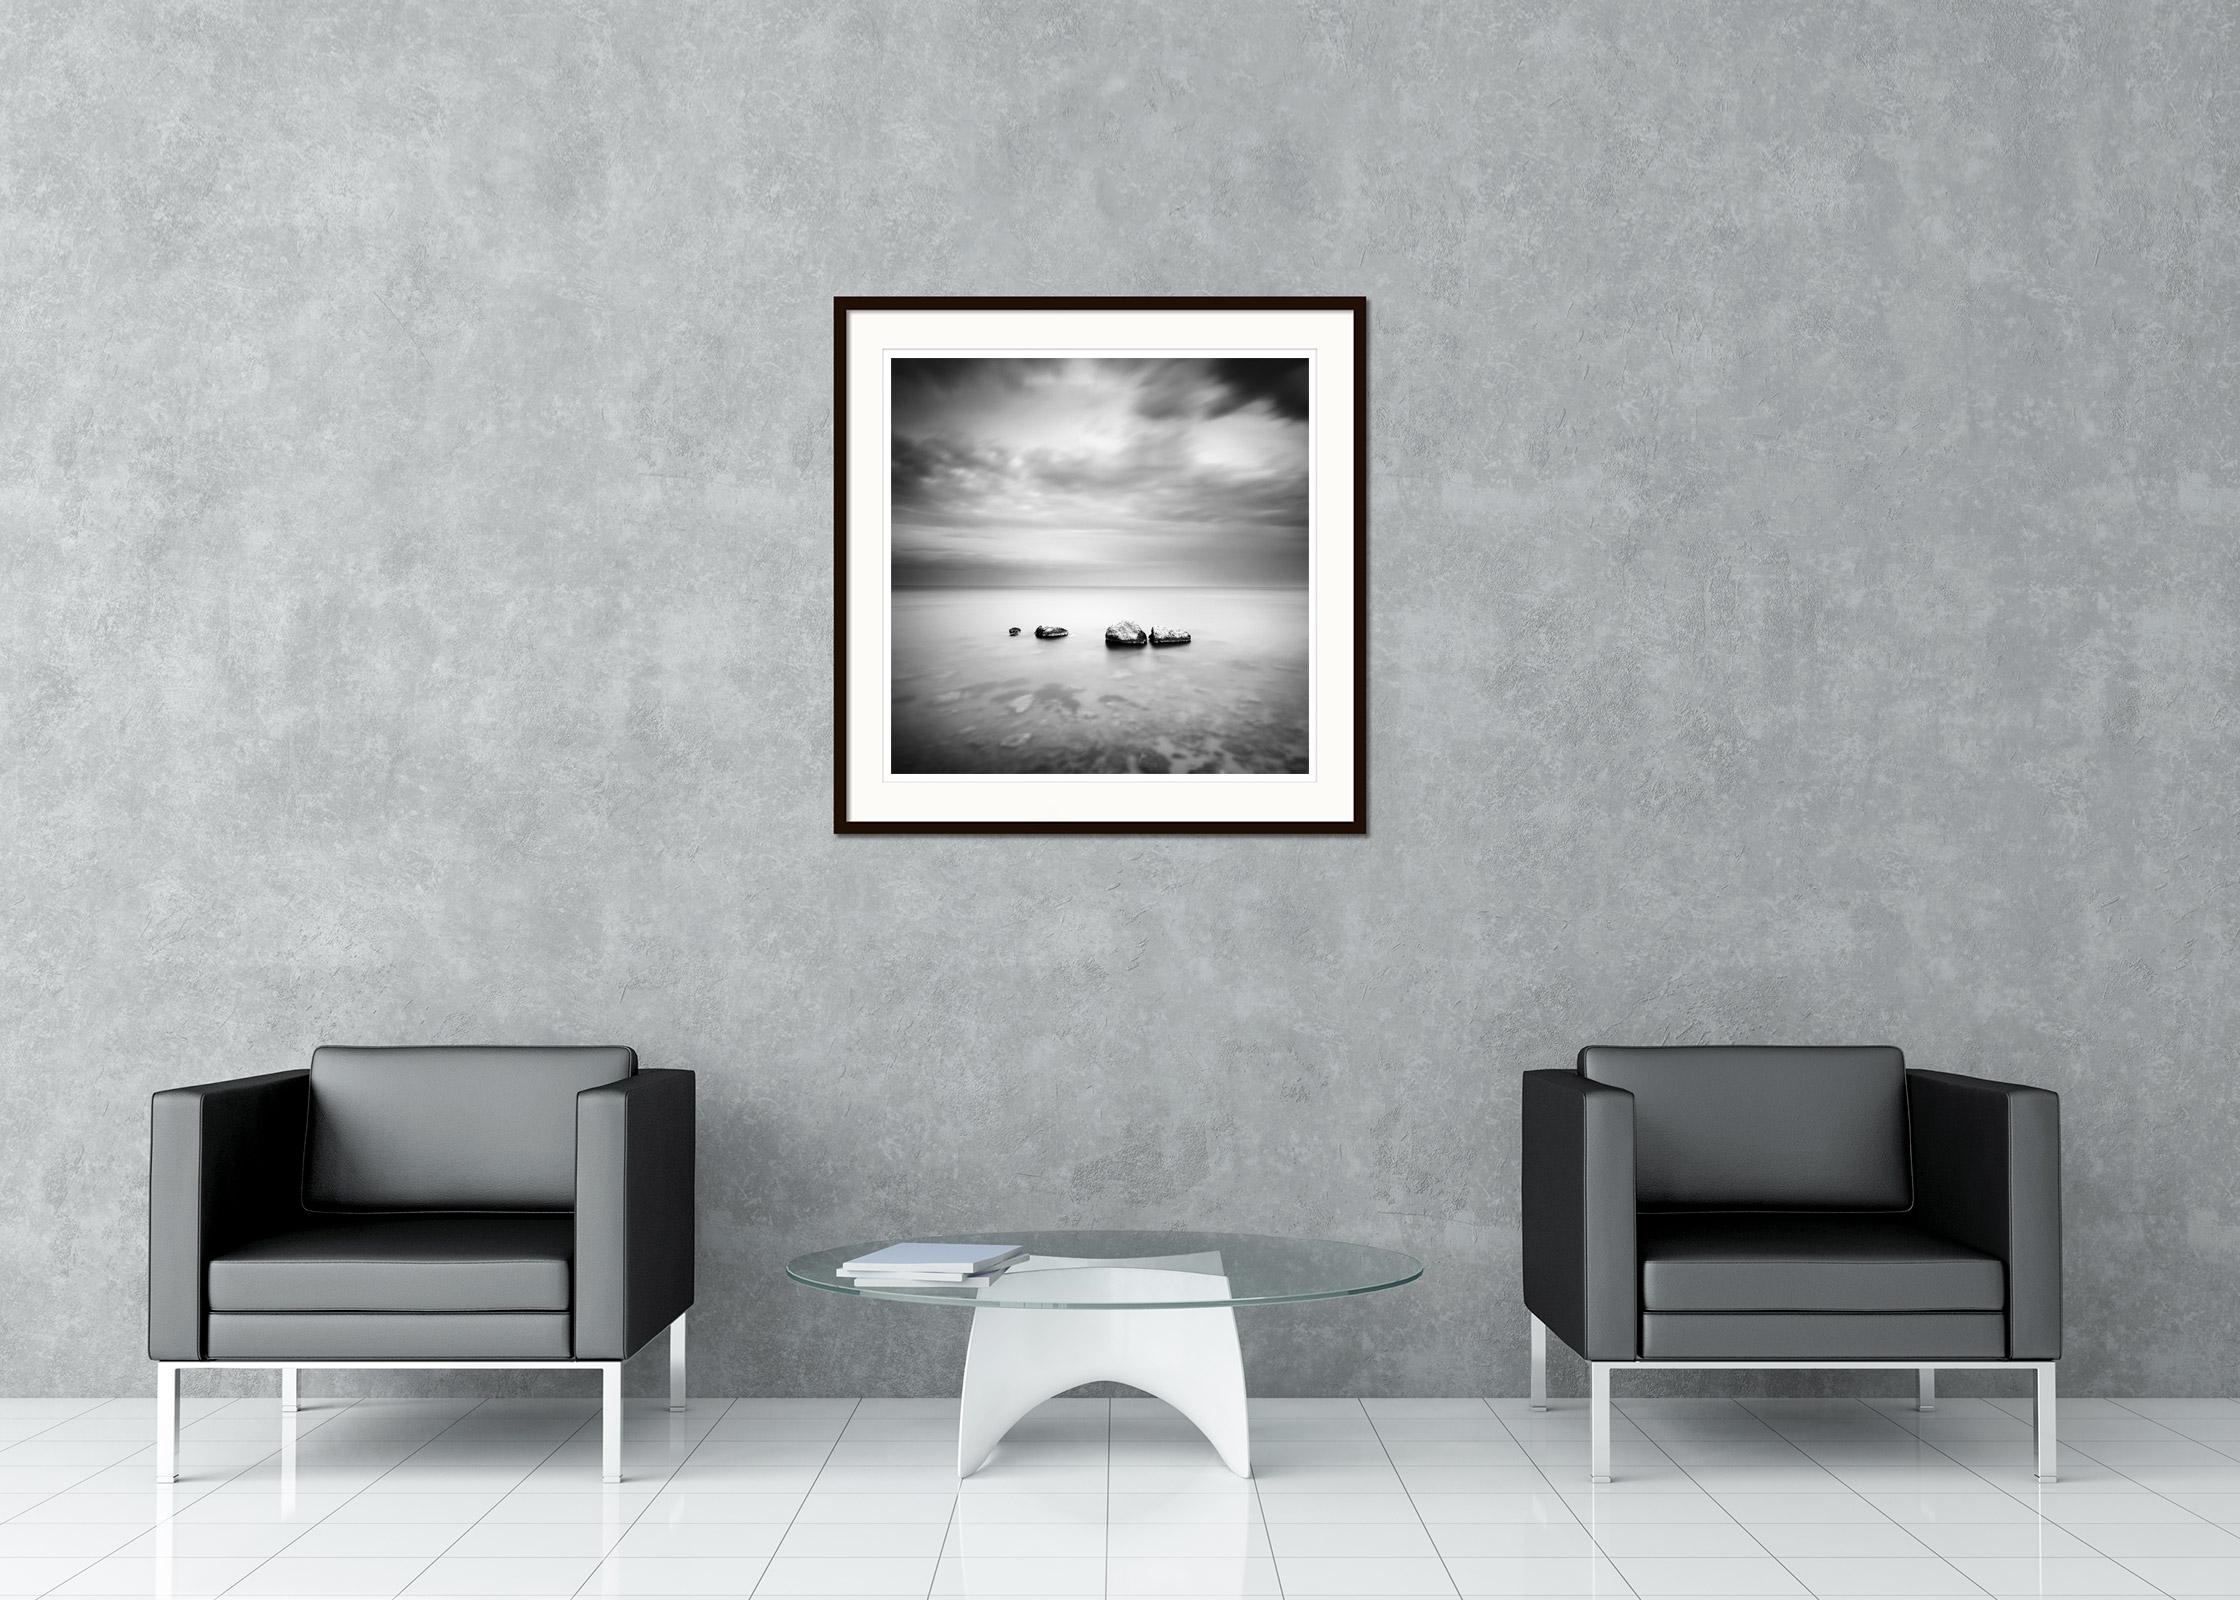 Black and white fine art minimalist seascape - landscape photography. Three stones in the sea during a storm on the coast of Spain. Archival pigment ink print, edition of 9. Signed, titled, dated and numbered by artist. Certificate of authenticity